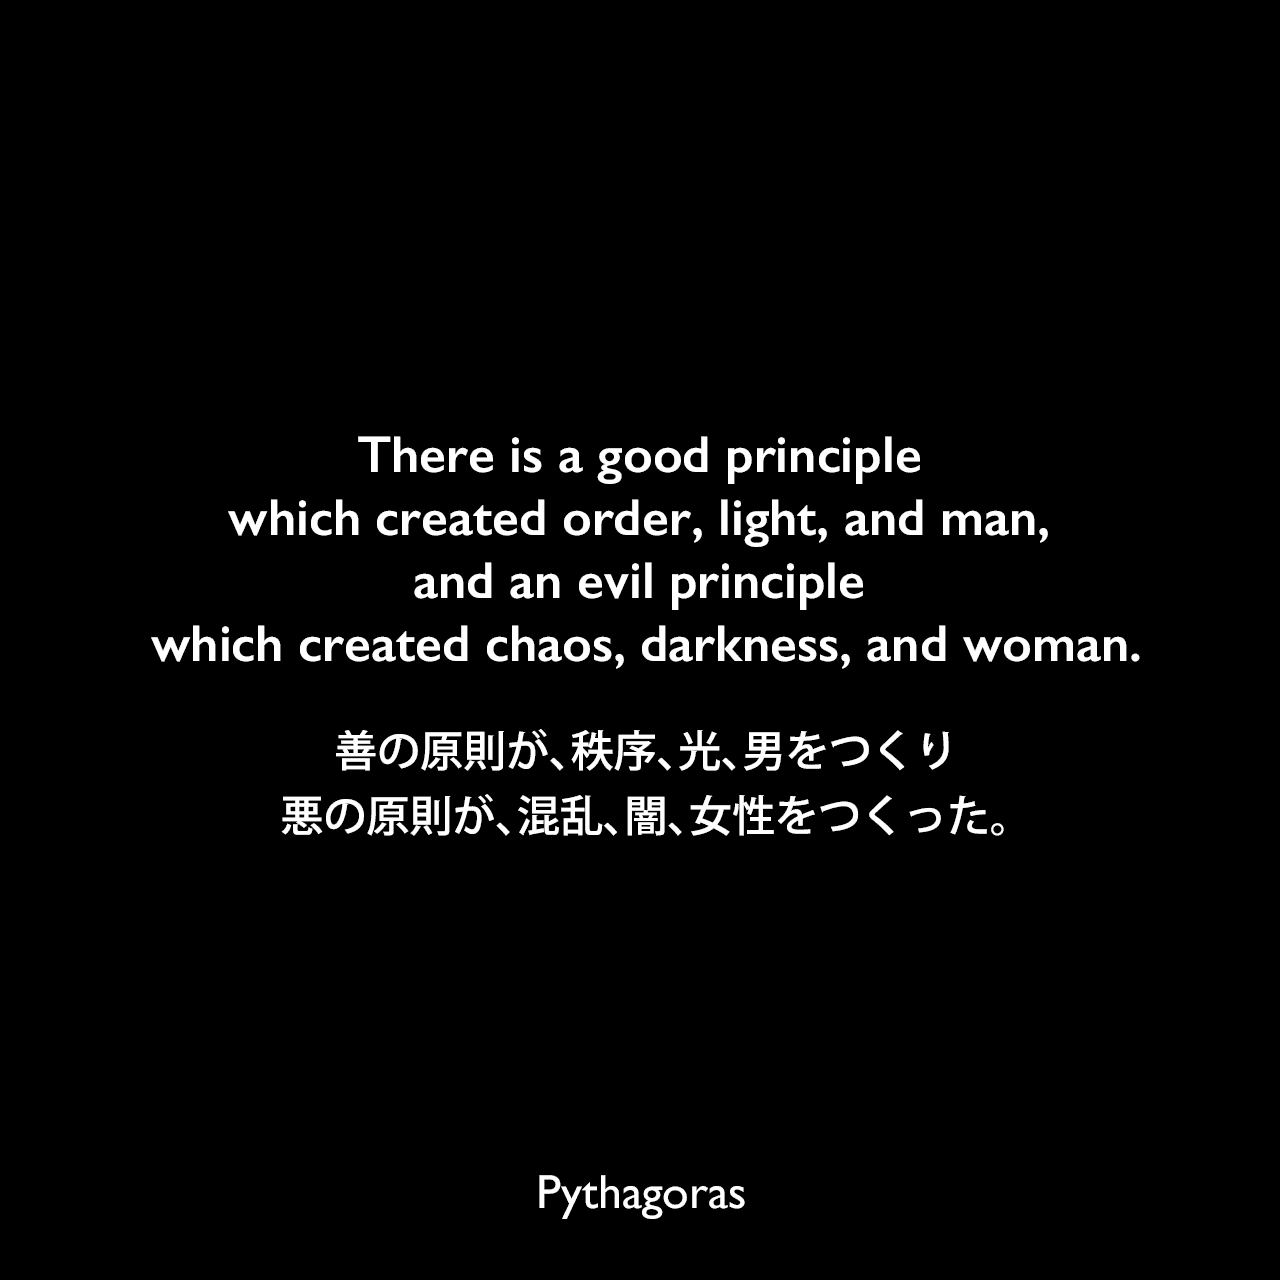 There is a good principle which created order, light, and man, and an evil principle which created chaos, darkness, and woman.善の原則が、秩序、光、男をつくり、悪の原則が、混乱、闇、女性をつくった。Pythagoras